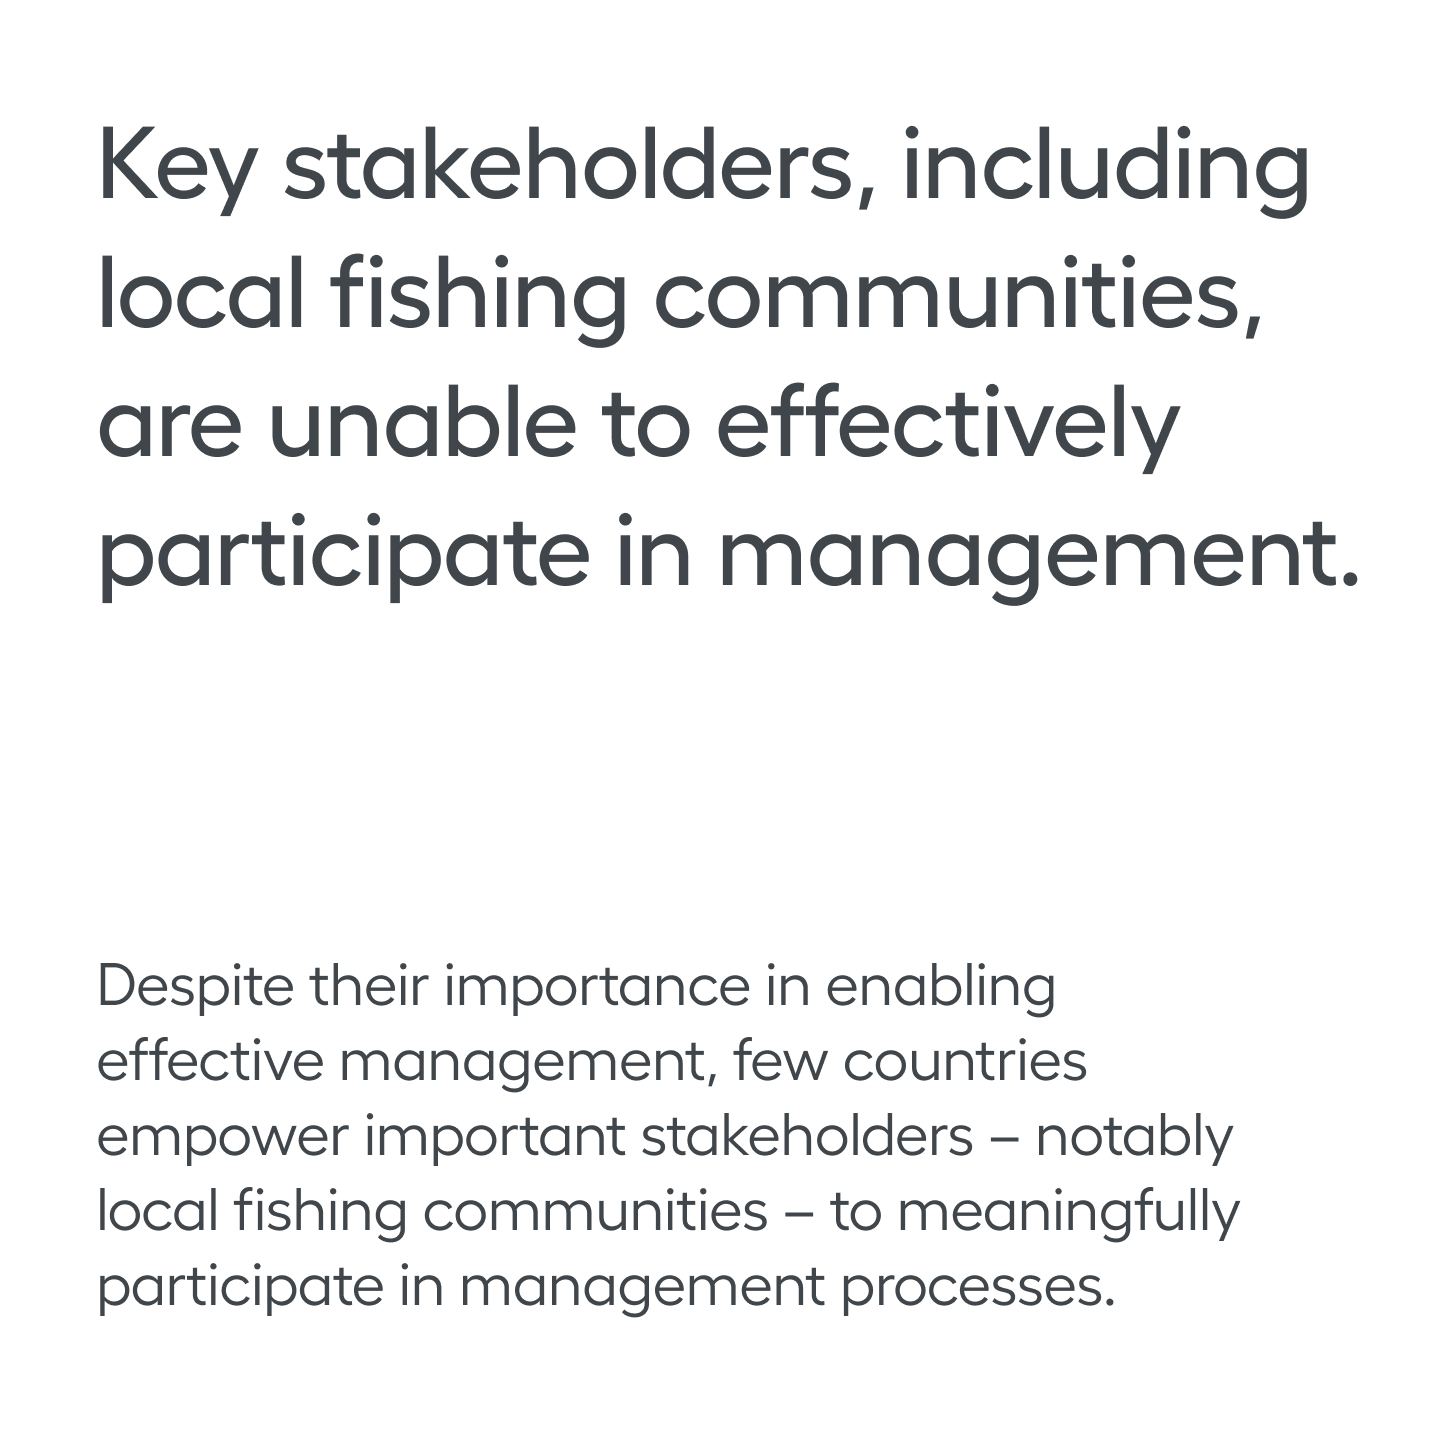 Headline and body copy that raises awareness about key stakeholders. like fisherman, not being included in the management process.